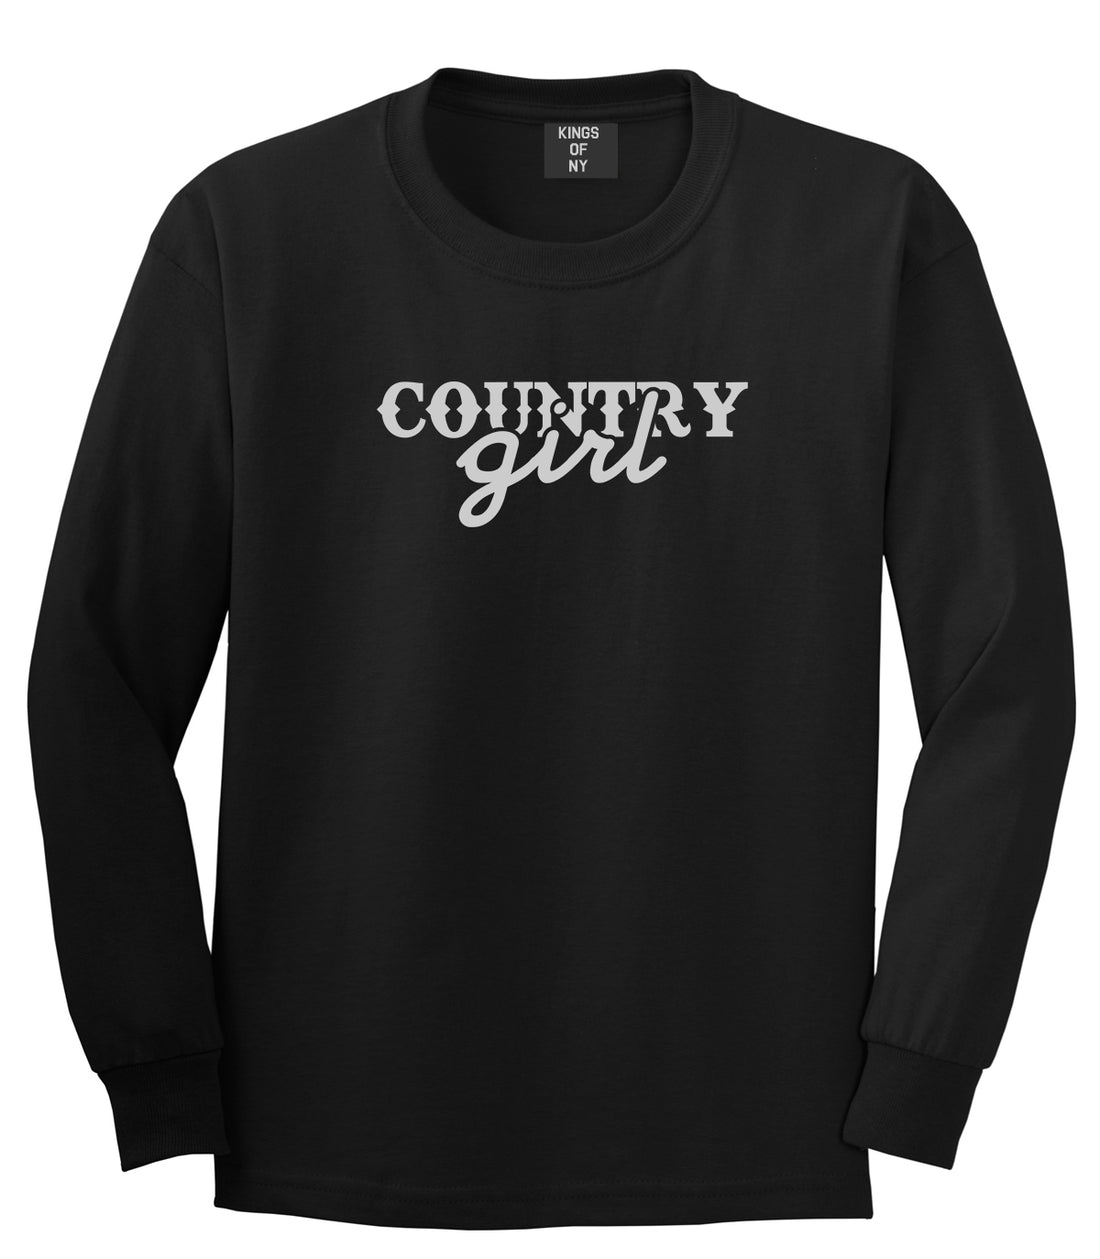 Country Girl Black Long Sleeve T-Shirt by Kings Of NY